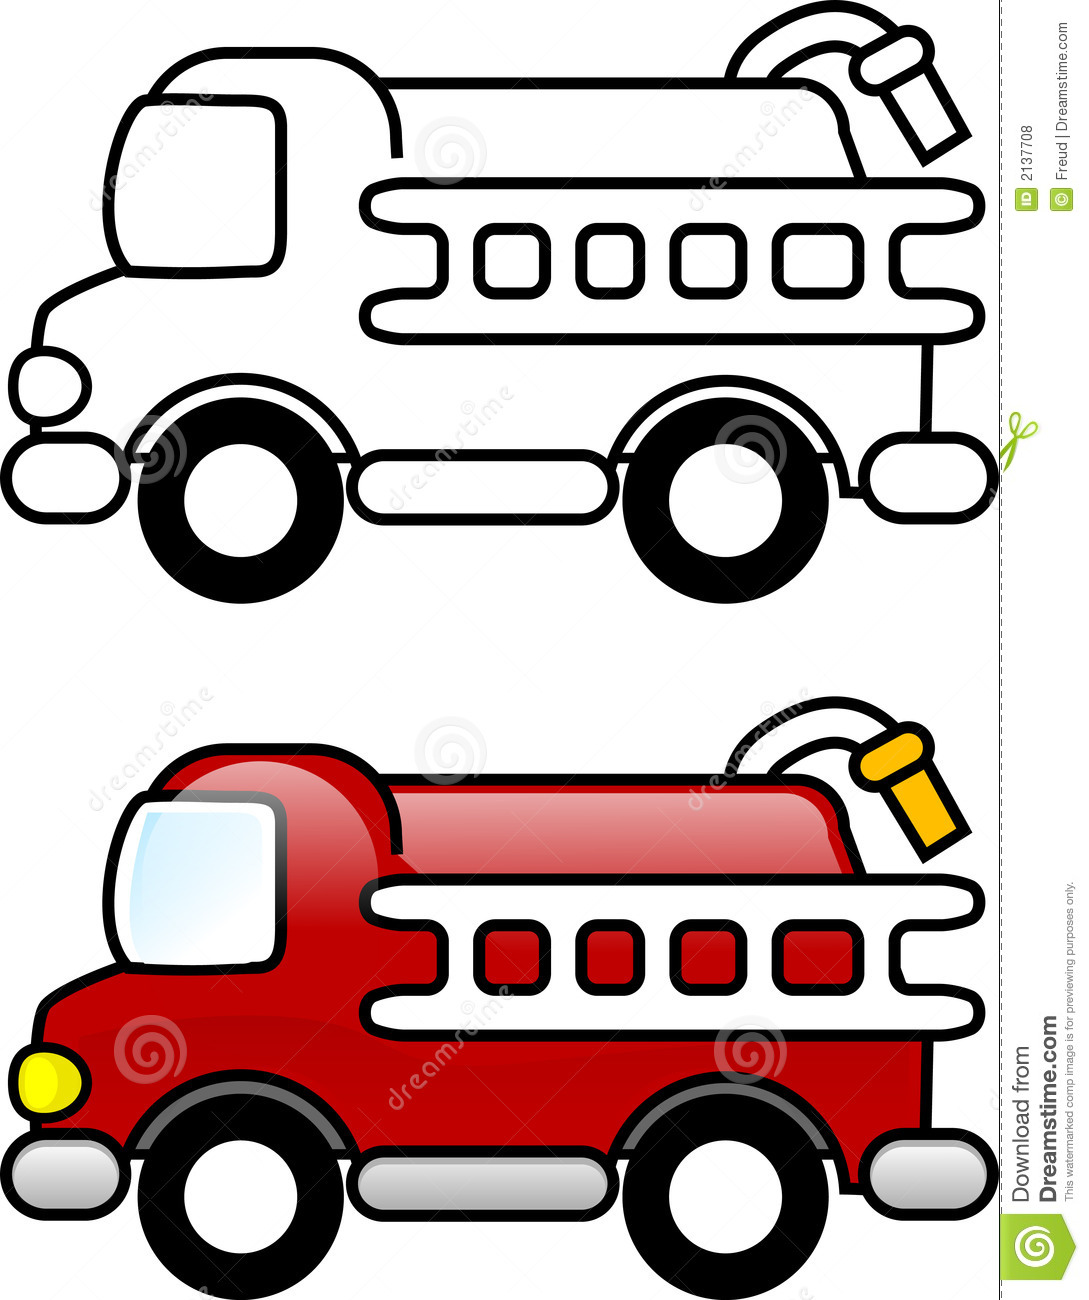 Firetruck Clipart Black And White Free download on